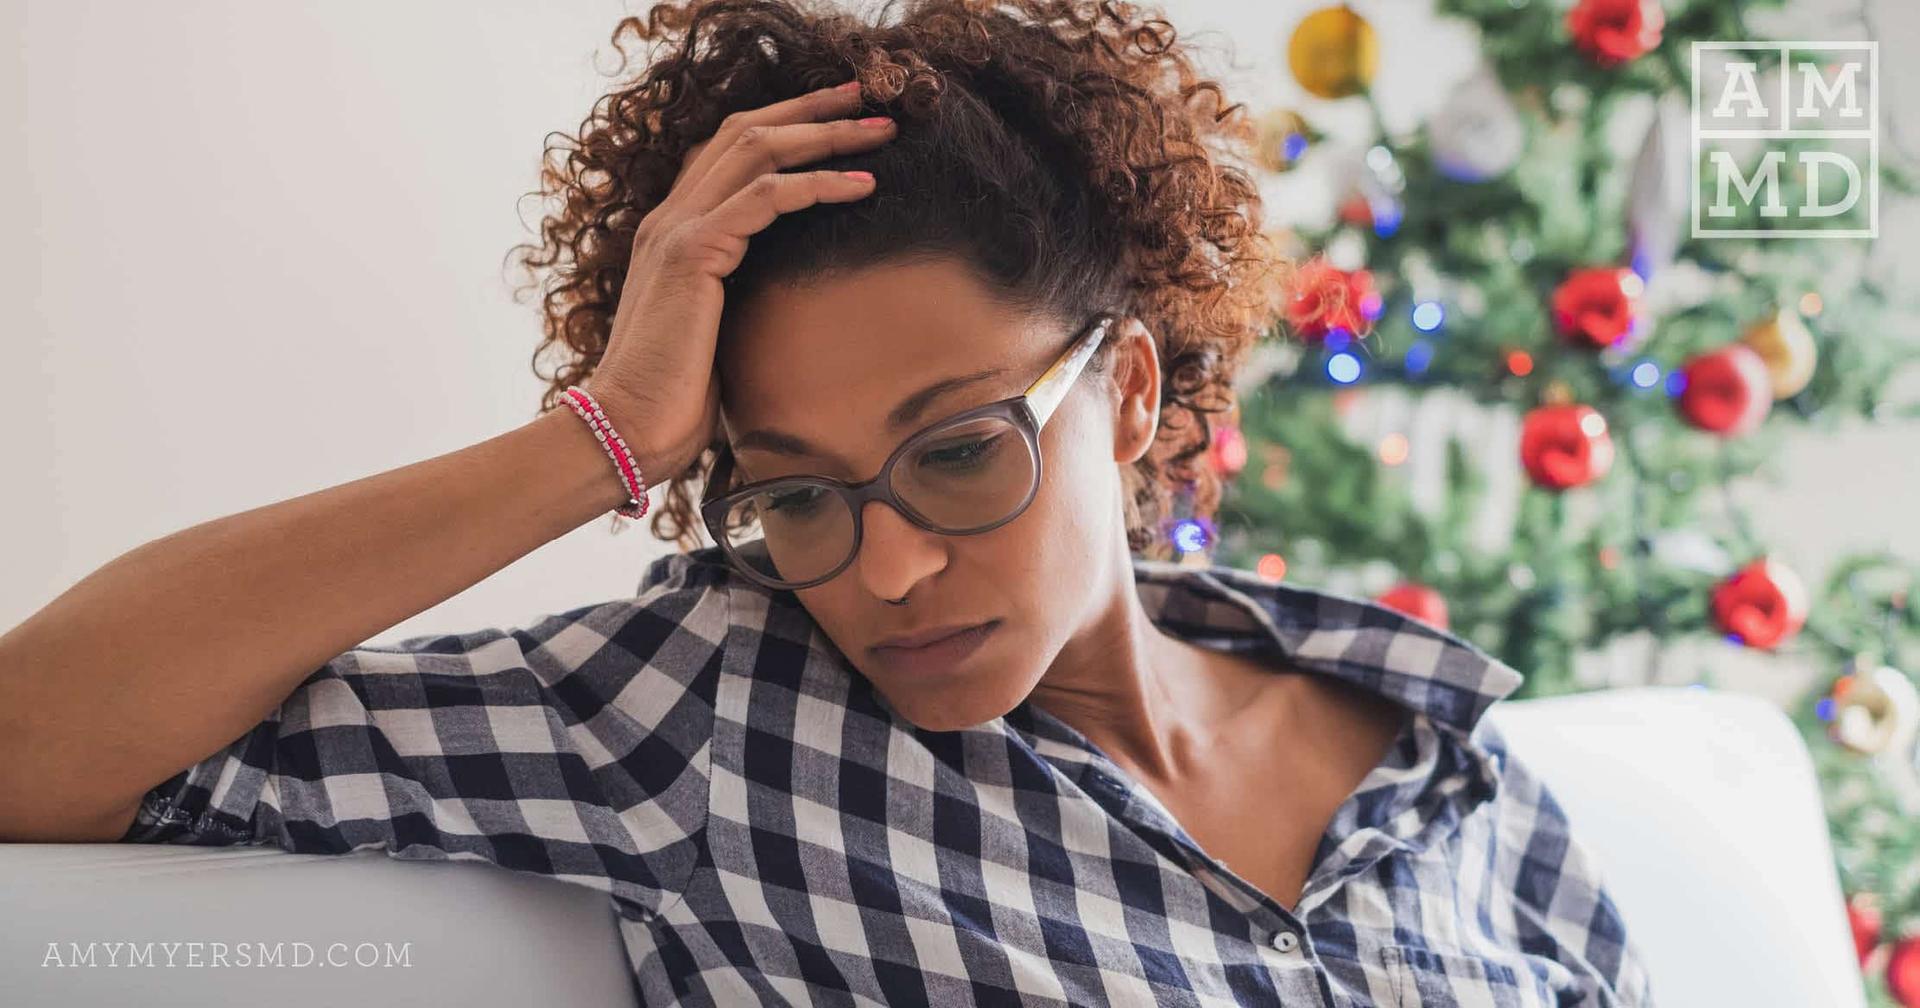 Your Holiday Gut Microbiome and Mental Health